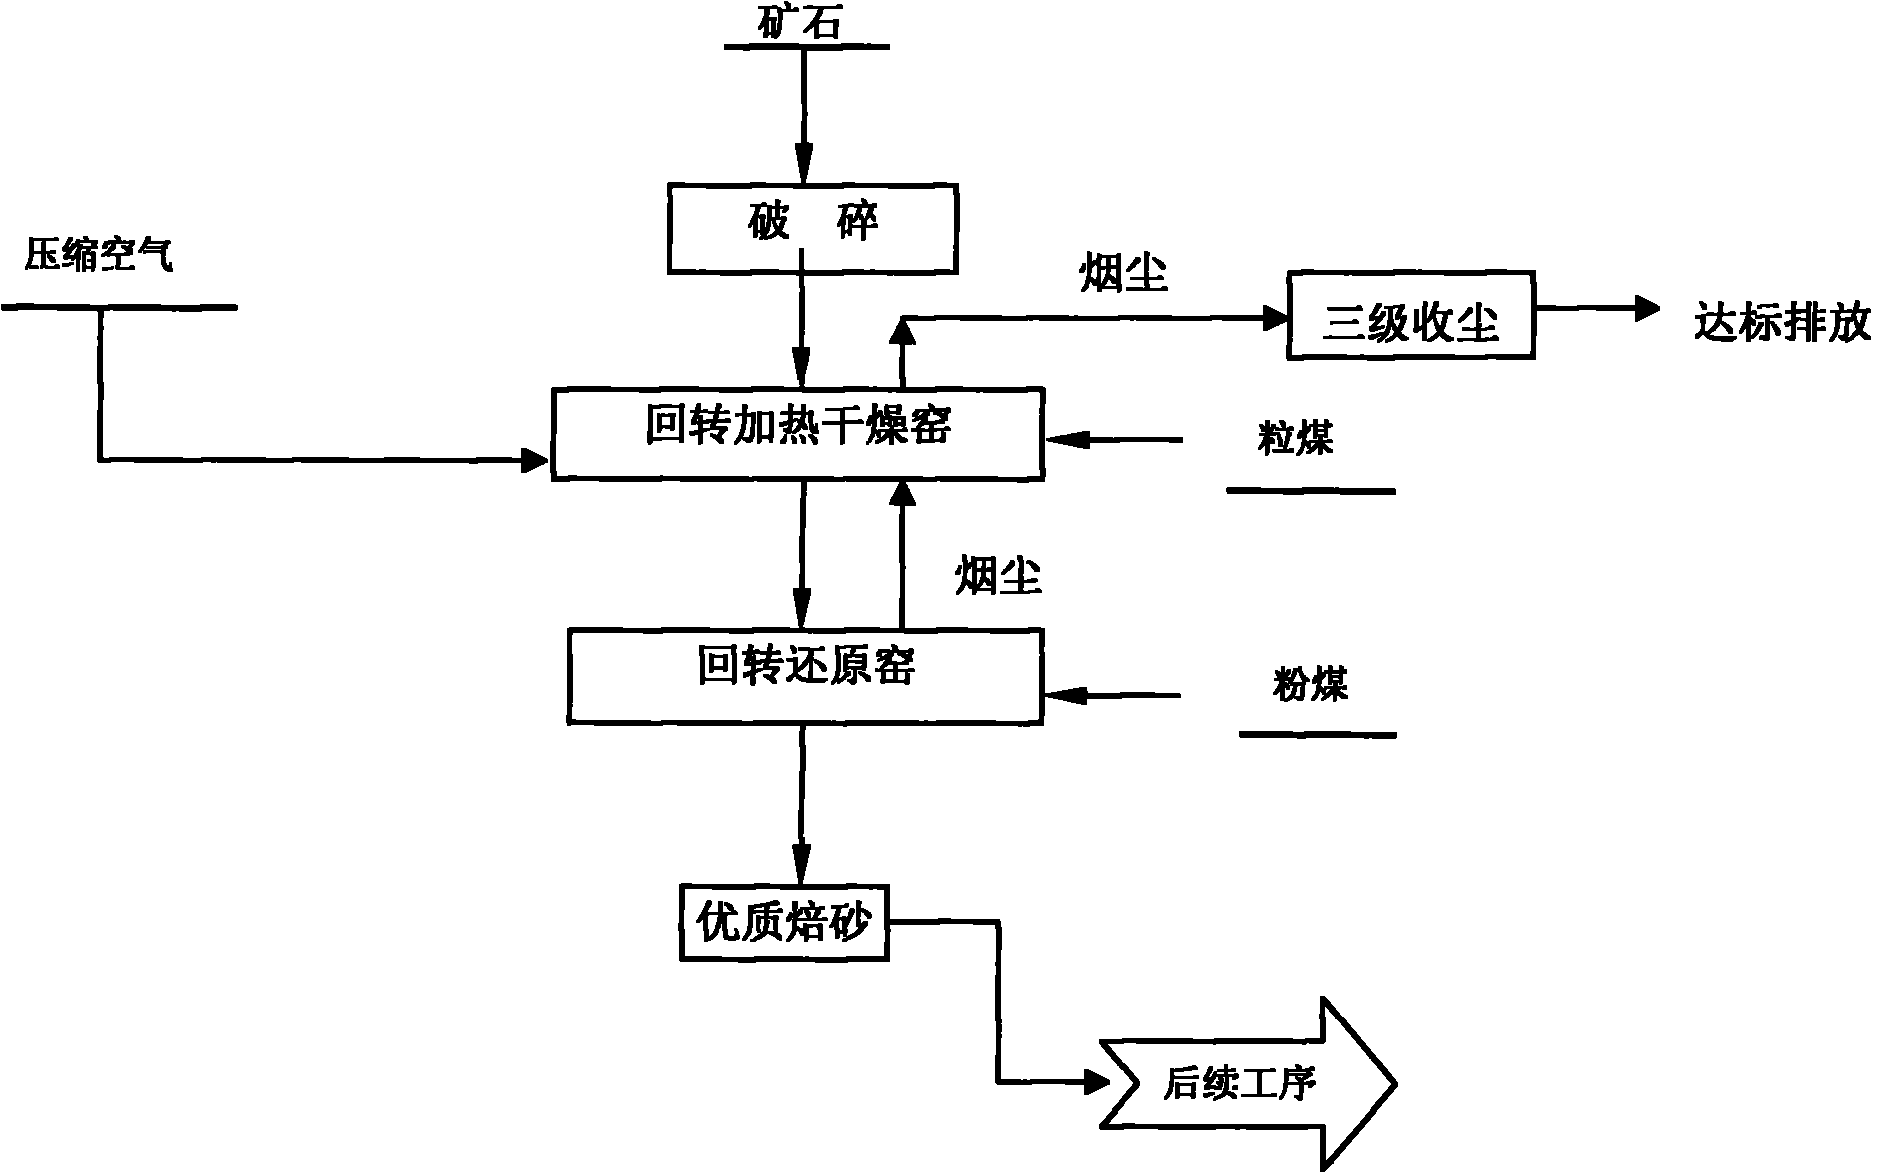 Method for drying and reducing low-grade latertic nickel ores by using bituminous coal